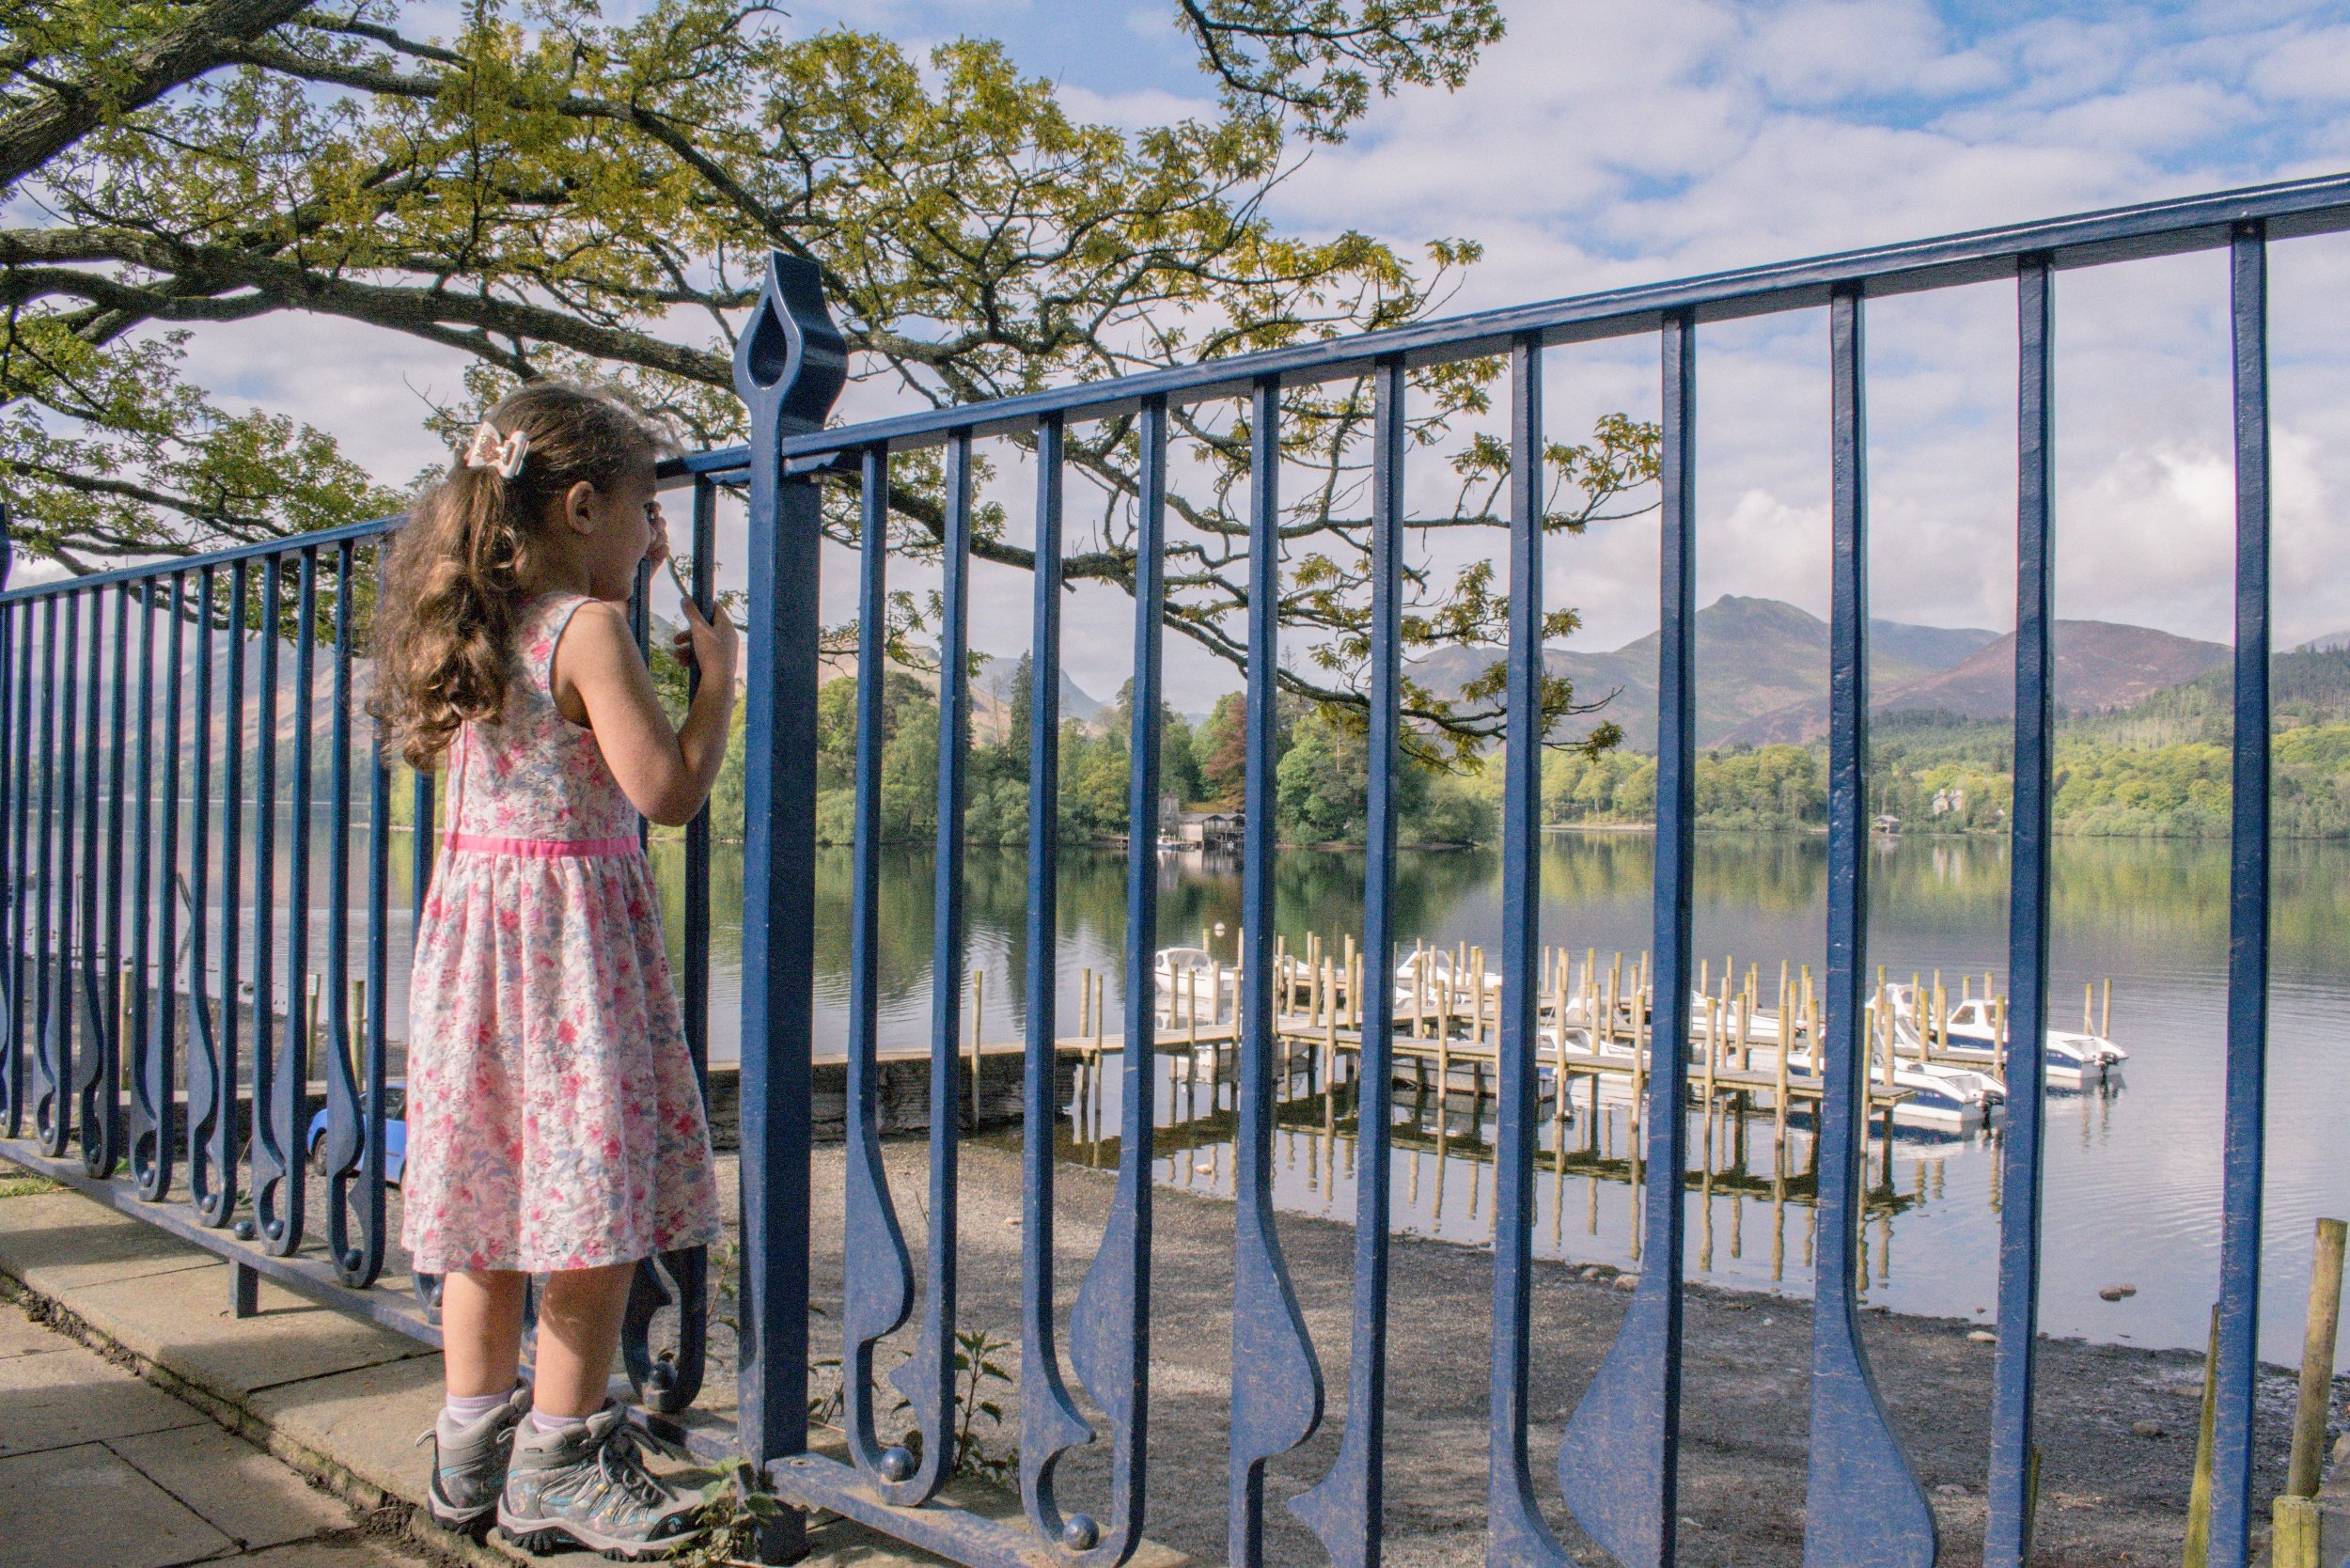 Pickle is stood facing away from the camera at blue metal railings. He is looking out at the jetty and boats on Derwentwater with the Lakeland fells beyond.